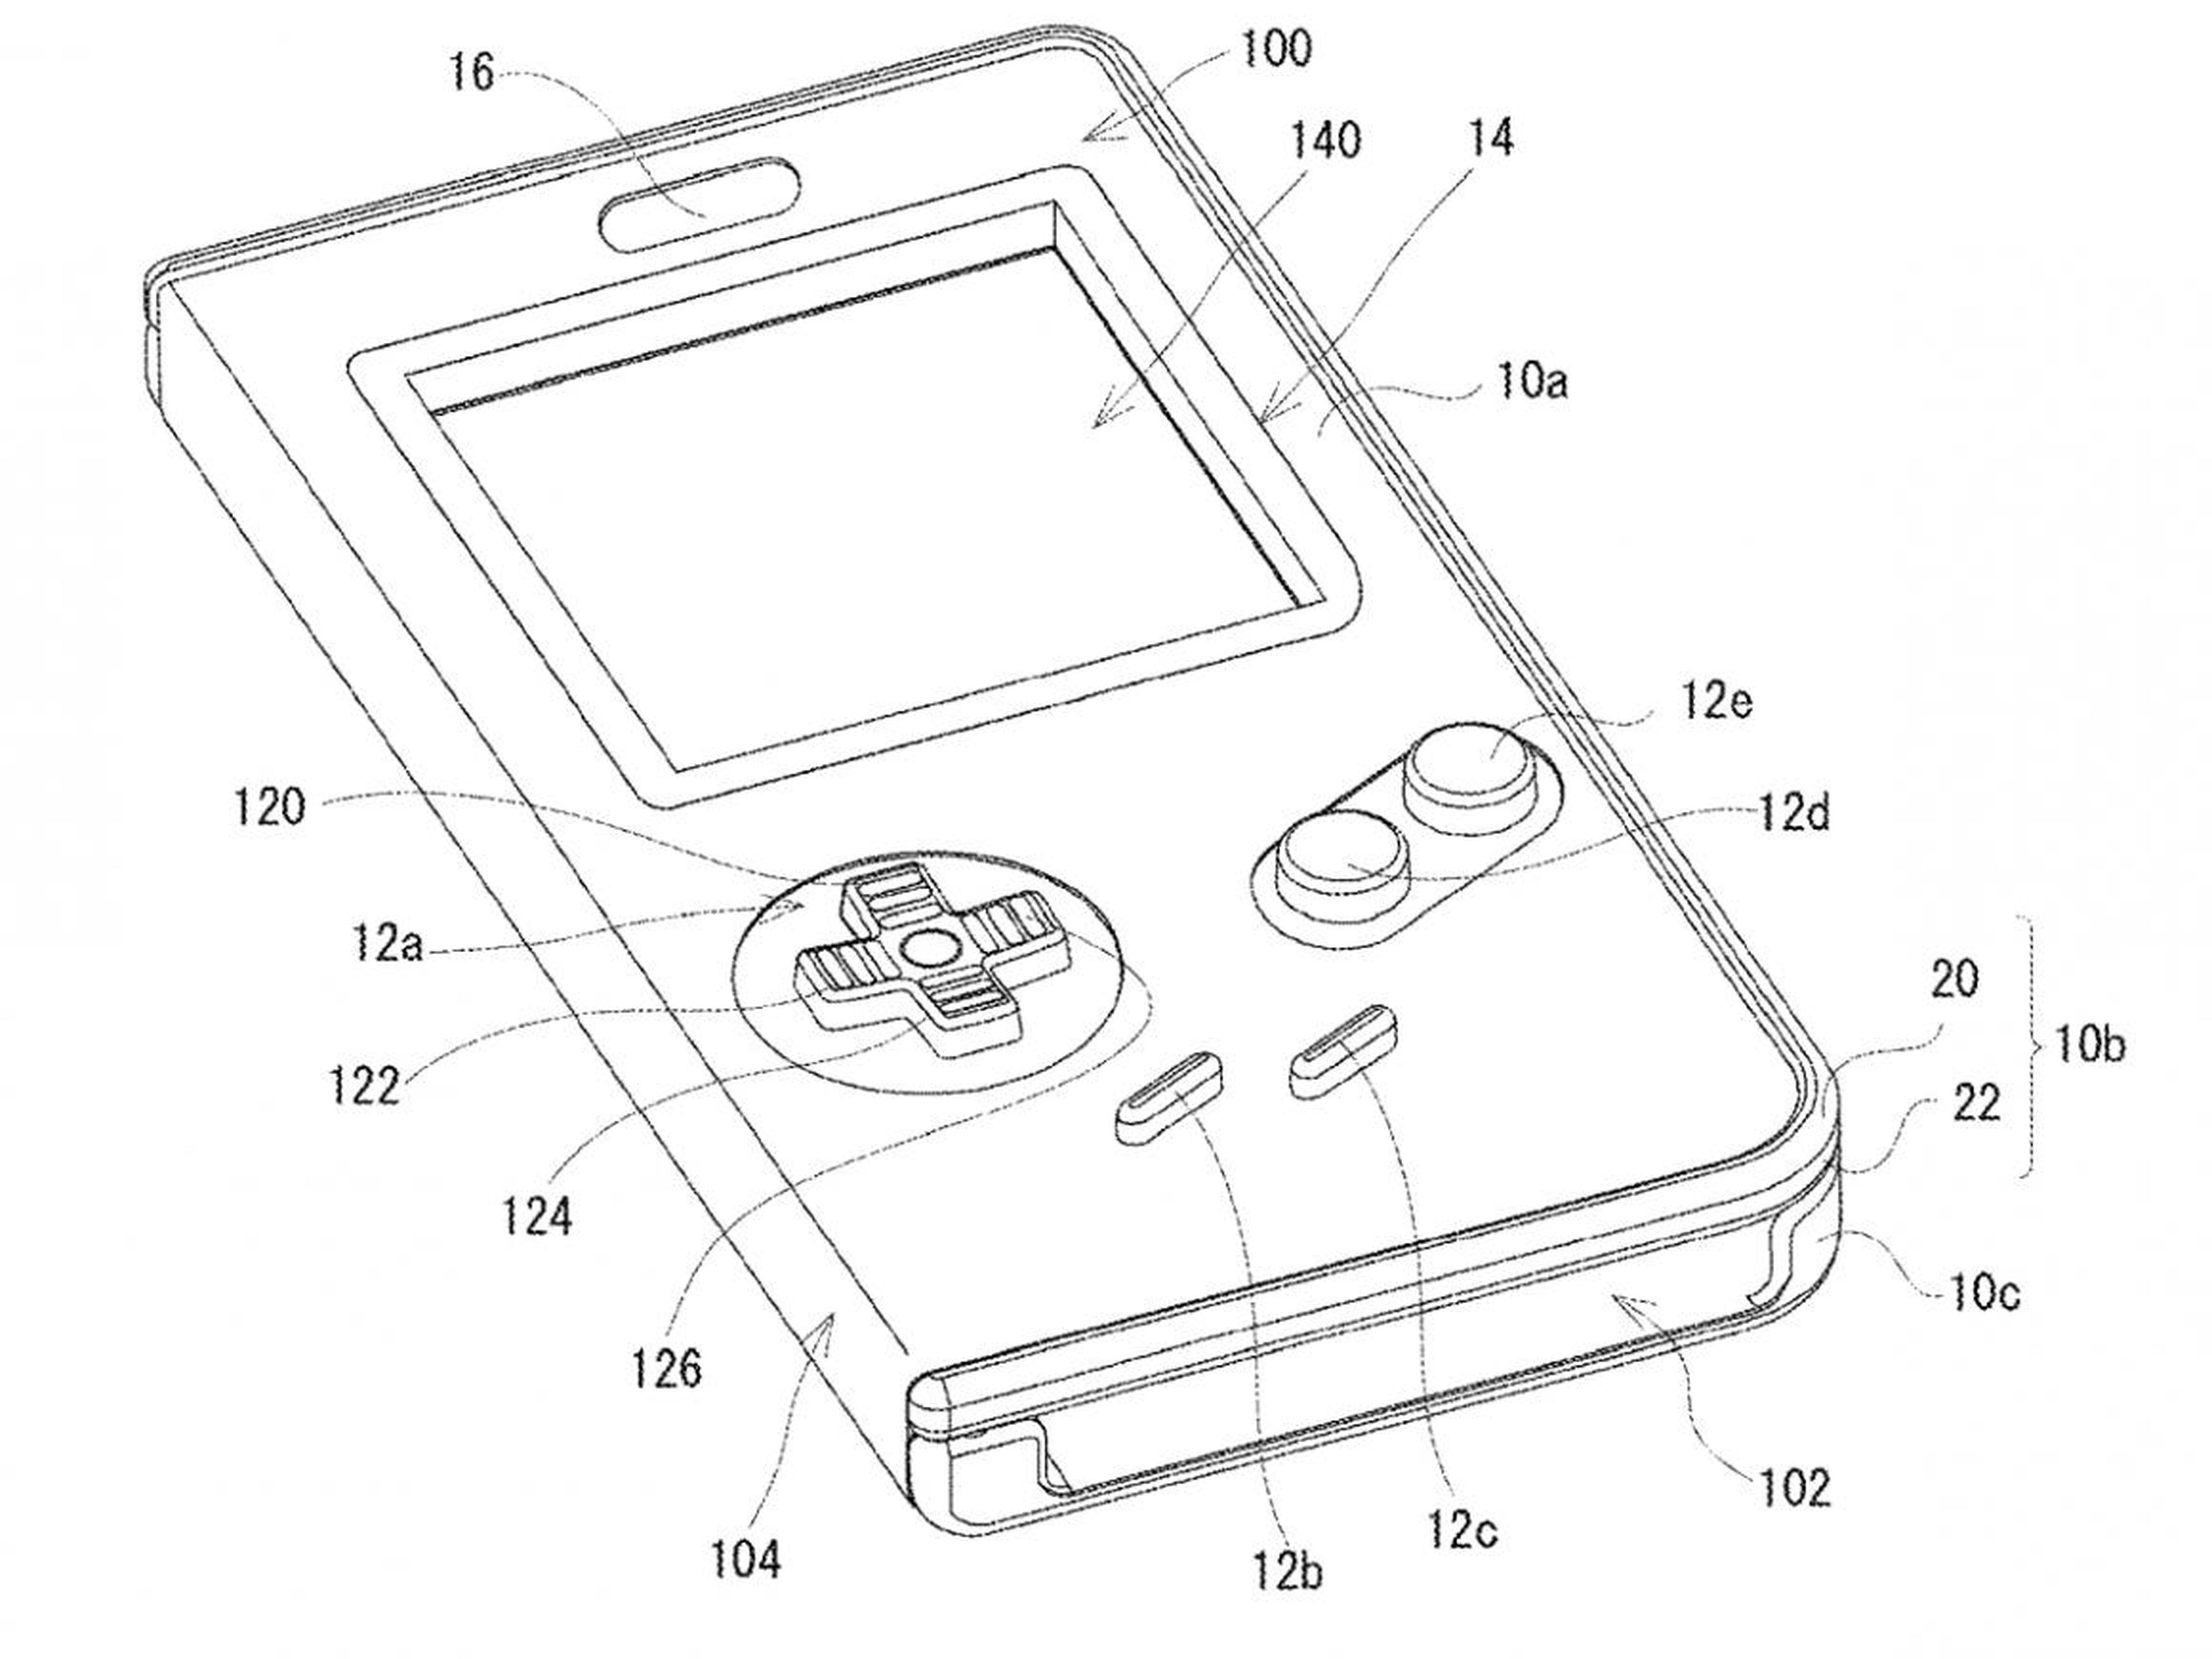 A design sketch for Nintendo's planned Game Boy phone case.